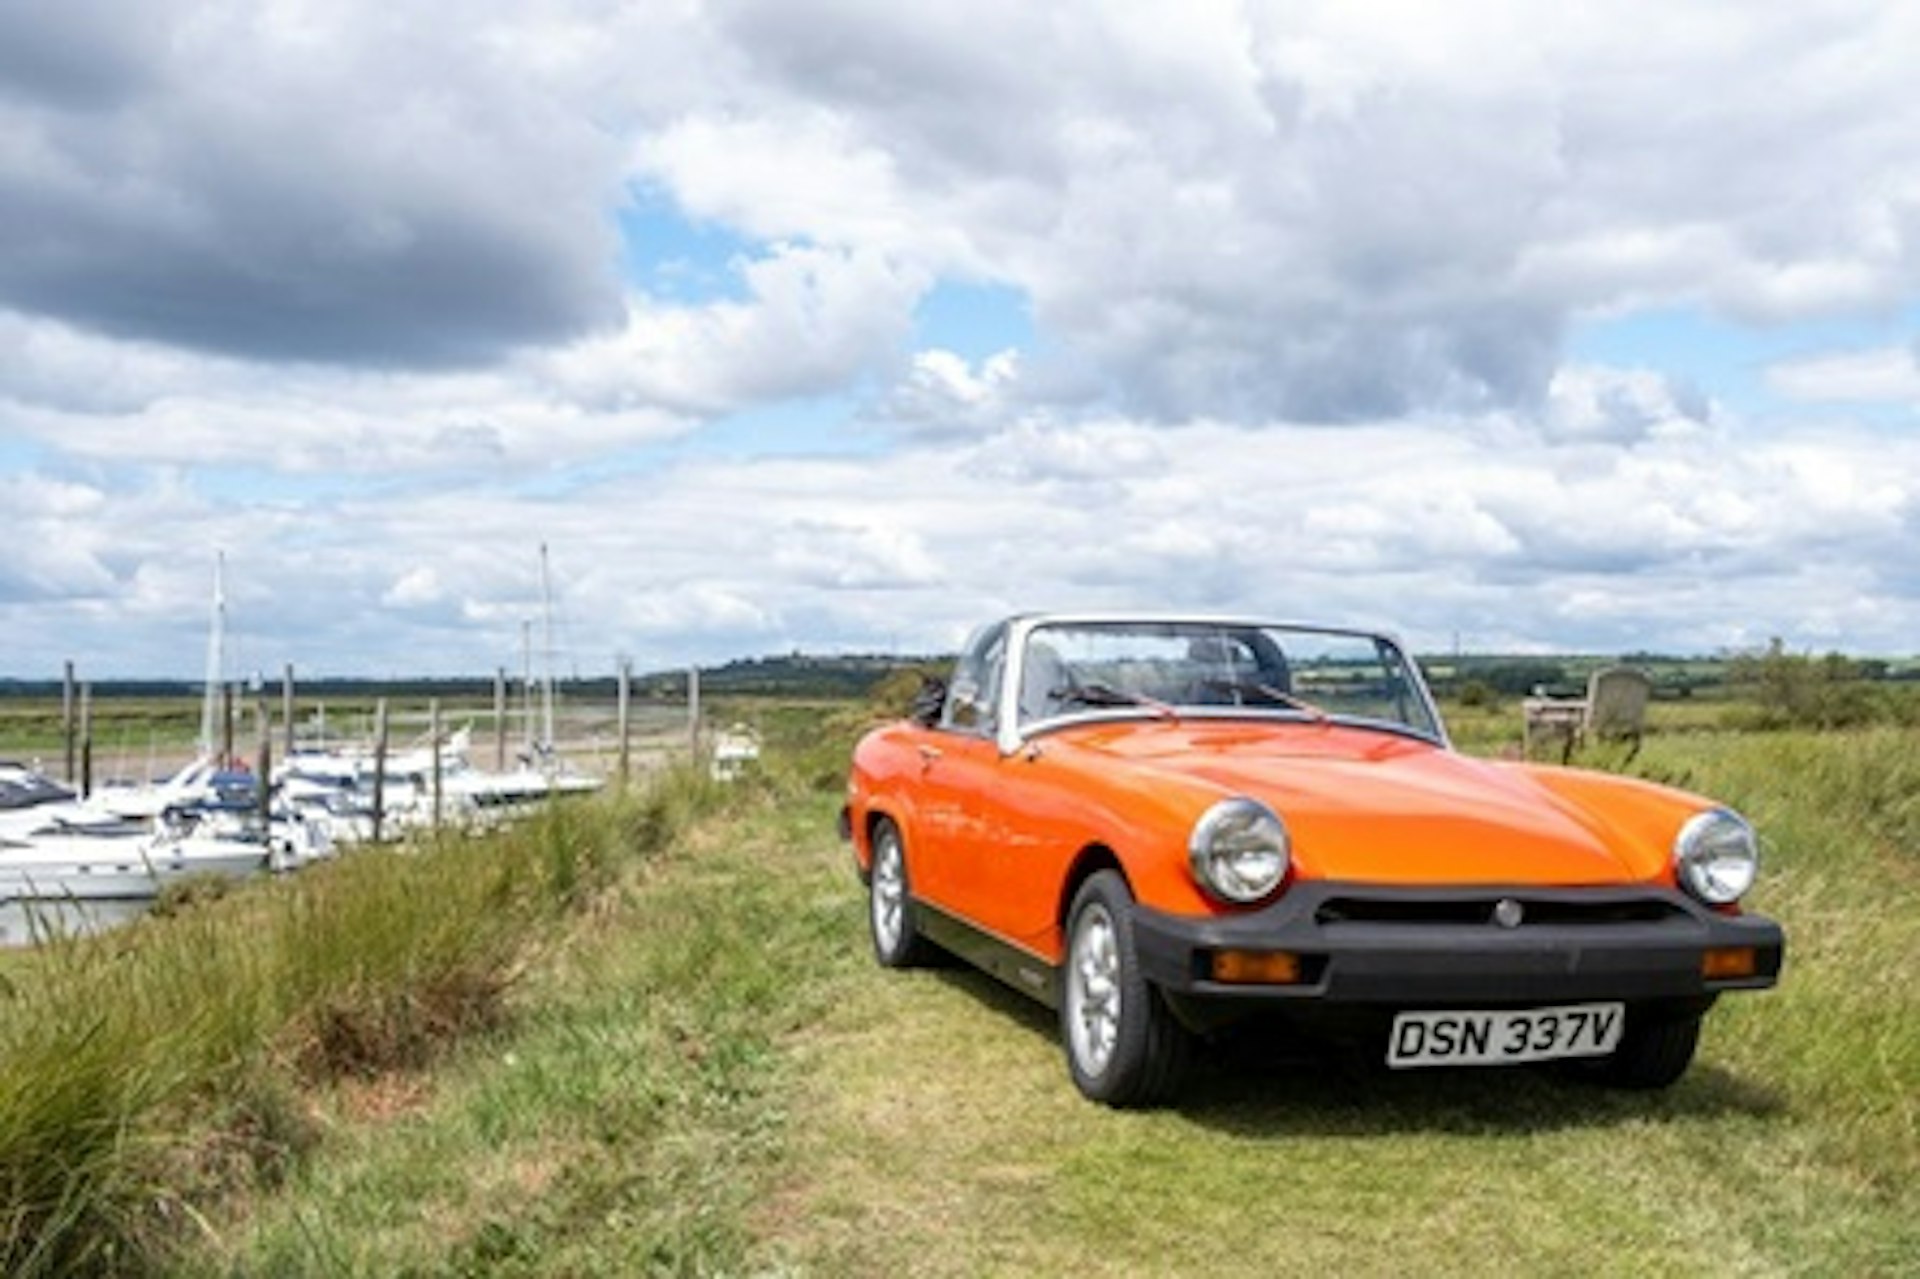 MG Midget Classic Car On Road Driving Experience